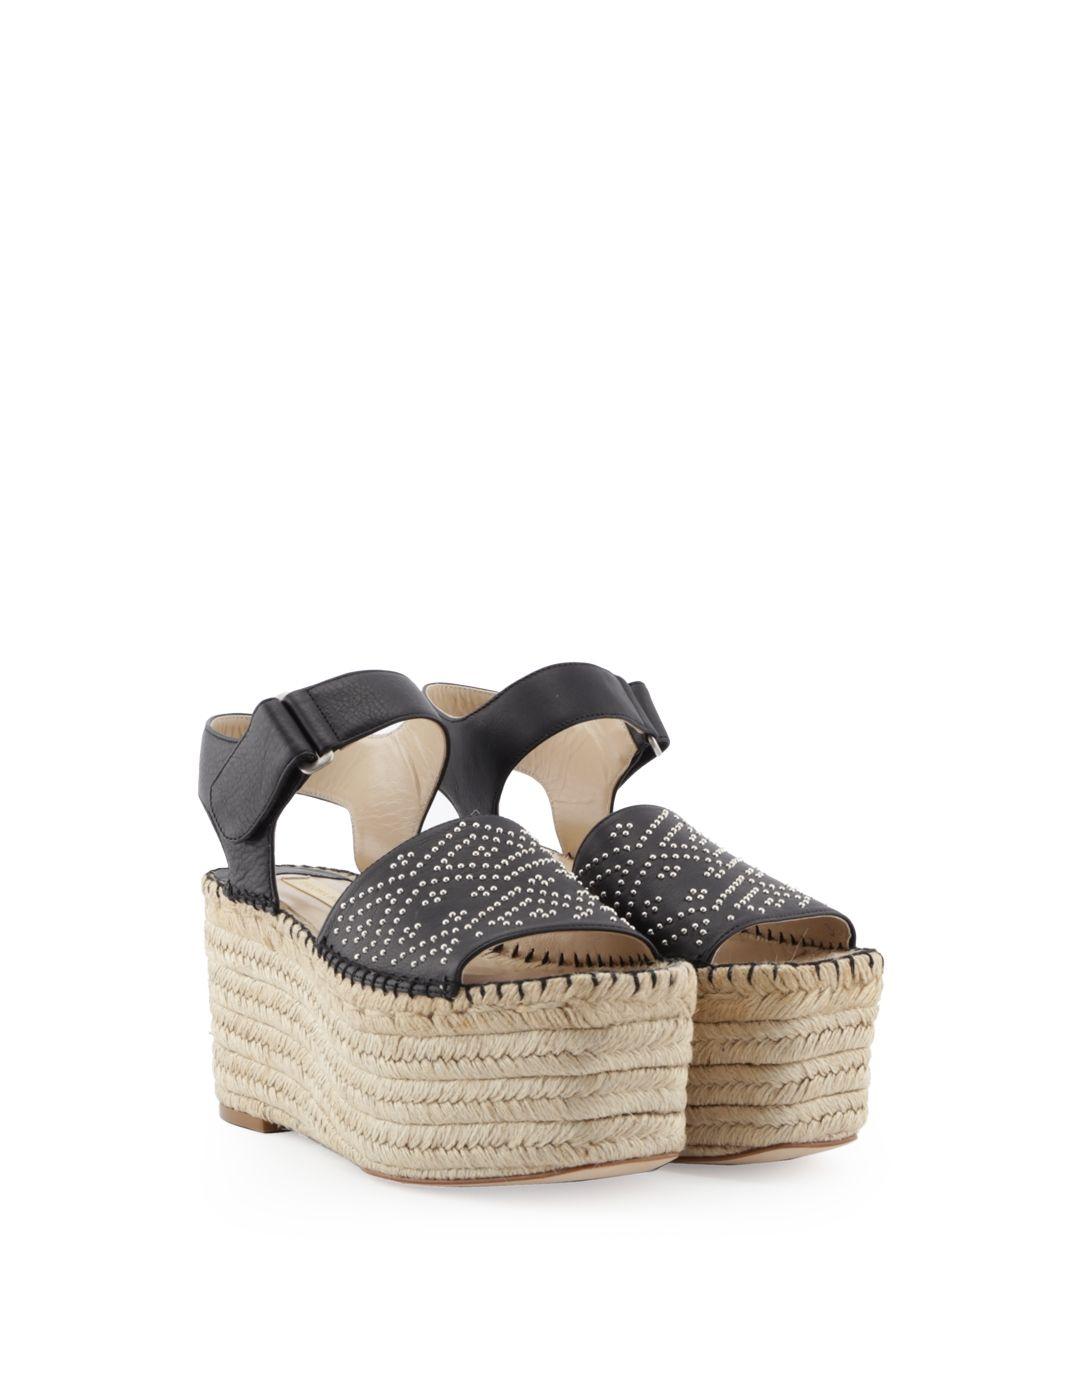 Paloma Barceló Gbco Leather Wedges in Black - Lyst